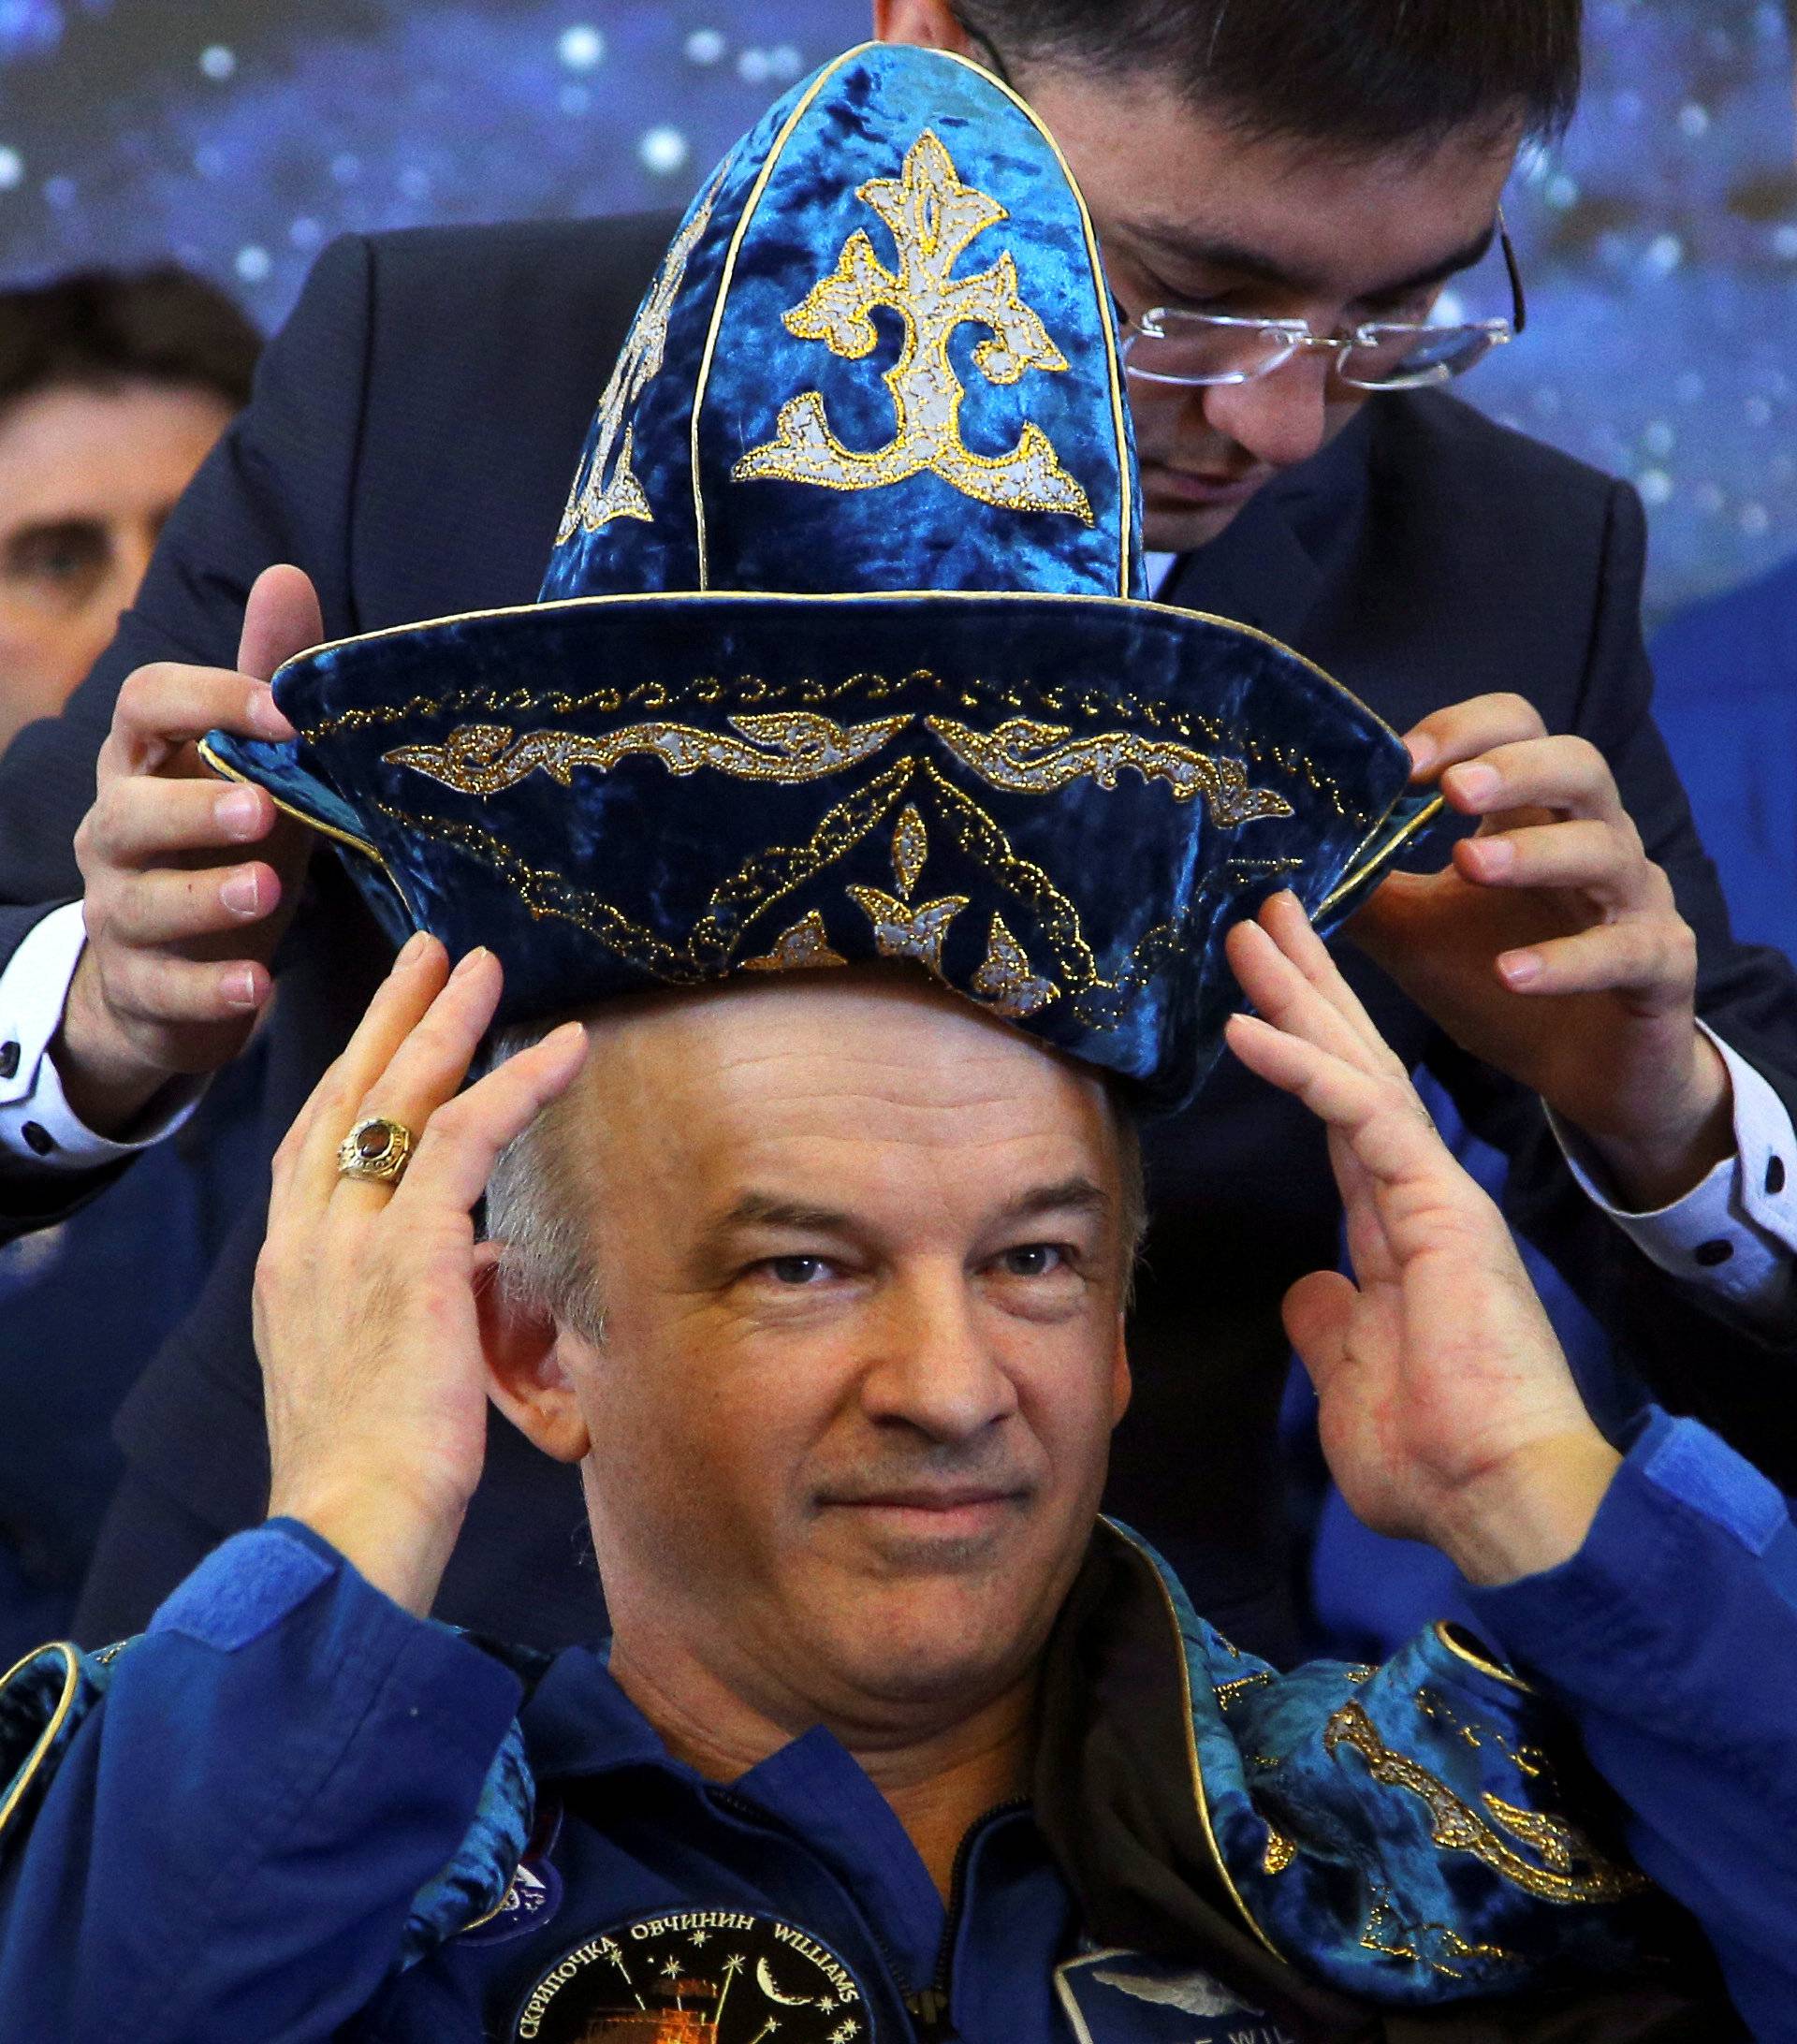 The International Space Station (ISS) crew member Jeff Williams of the U.S. adjusts Kazakh national costume presented to them at a news conference in Karaganda, Kazakhstan